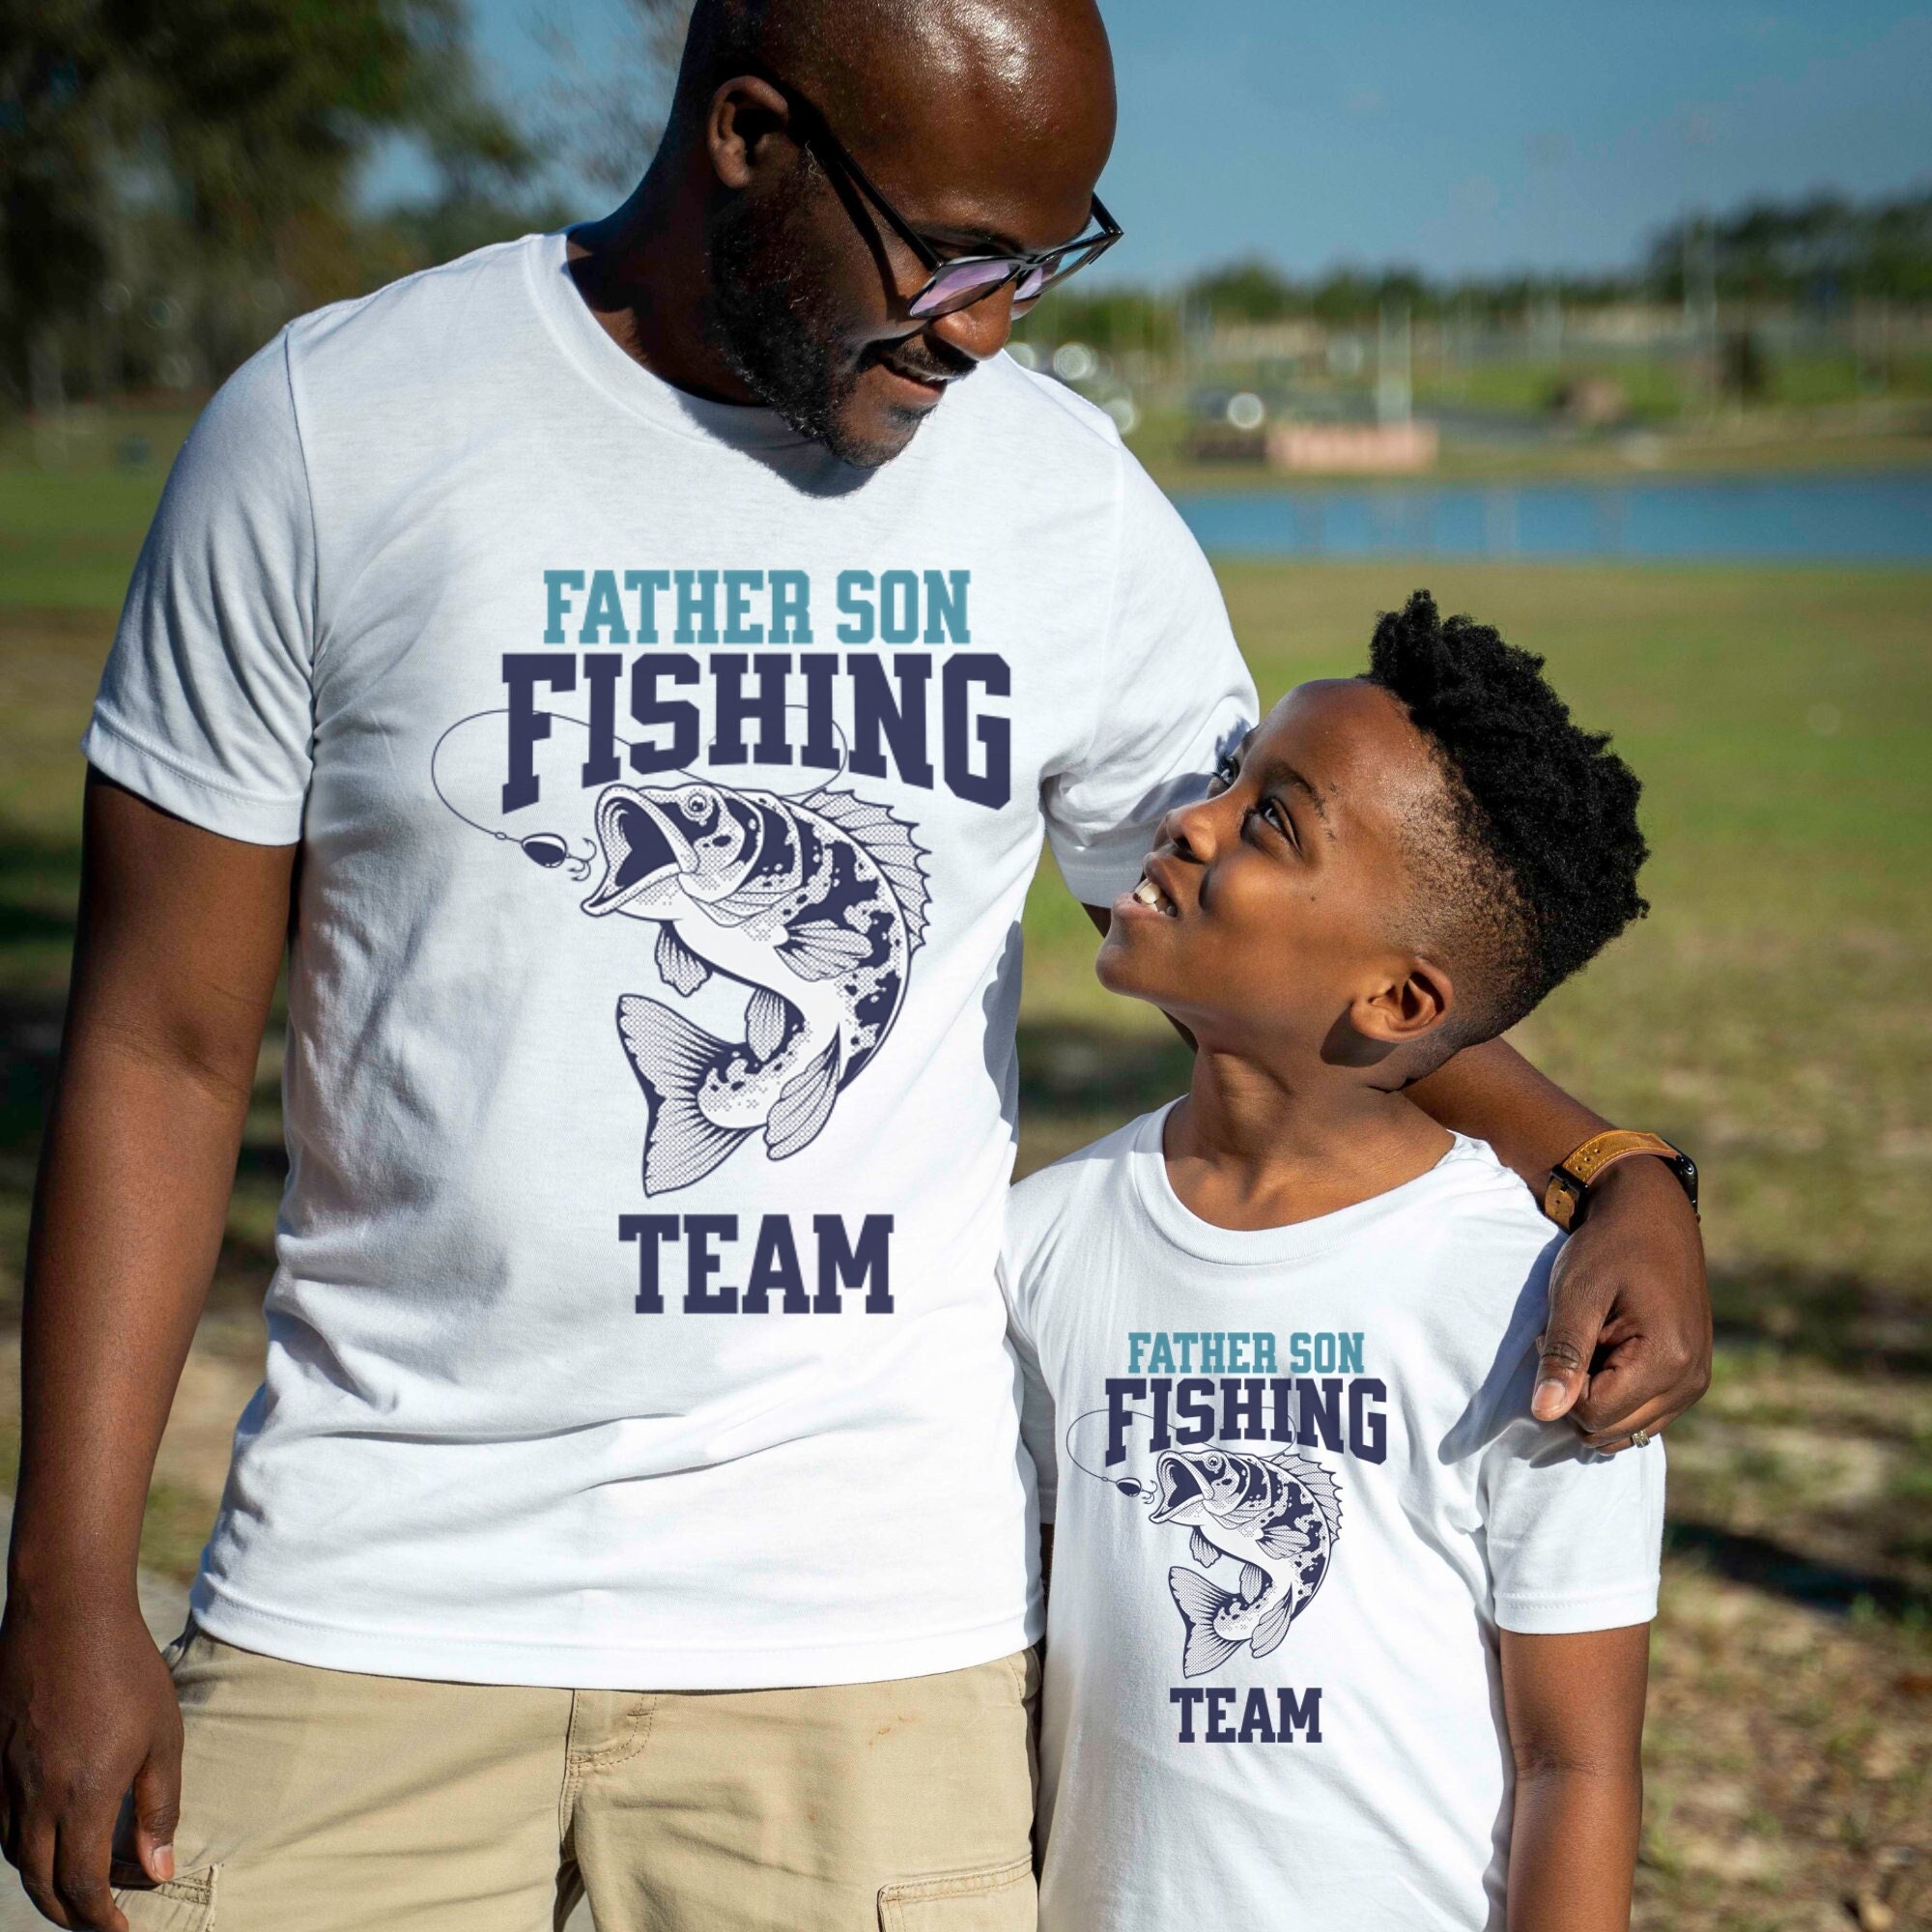 Dad and Son Fishing Shirts, Matching Father Son Shirts, Daddy and Me Shirts,  Fishing Tshirts Dad Son, Fishing Team T-shirts, Family Shirts, 